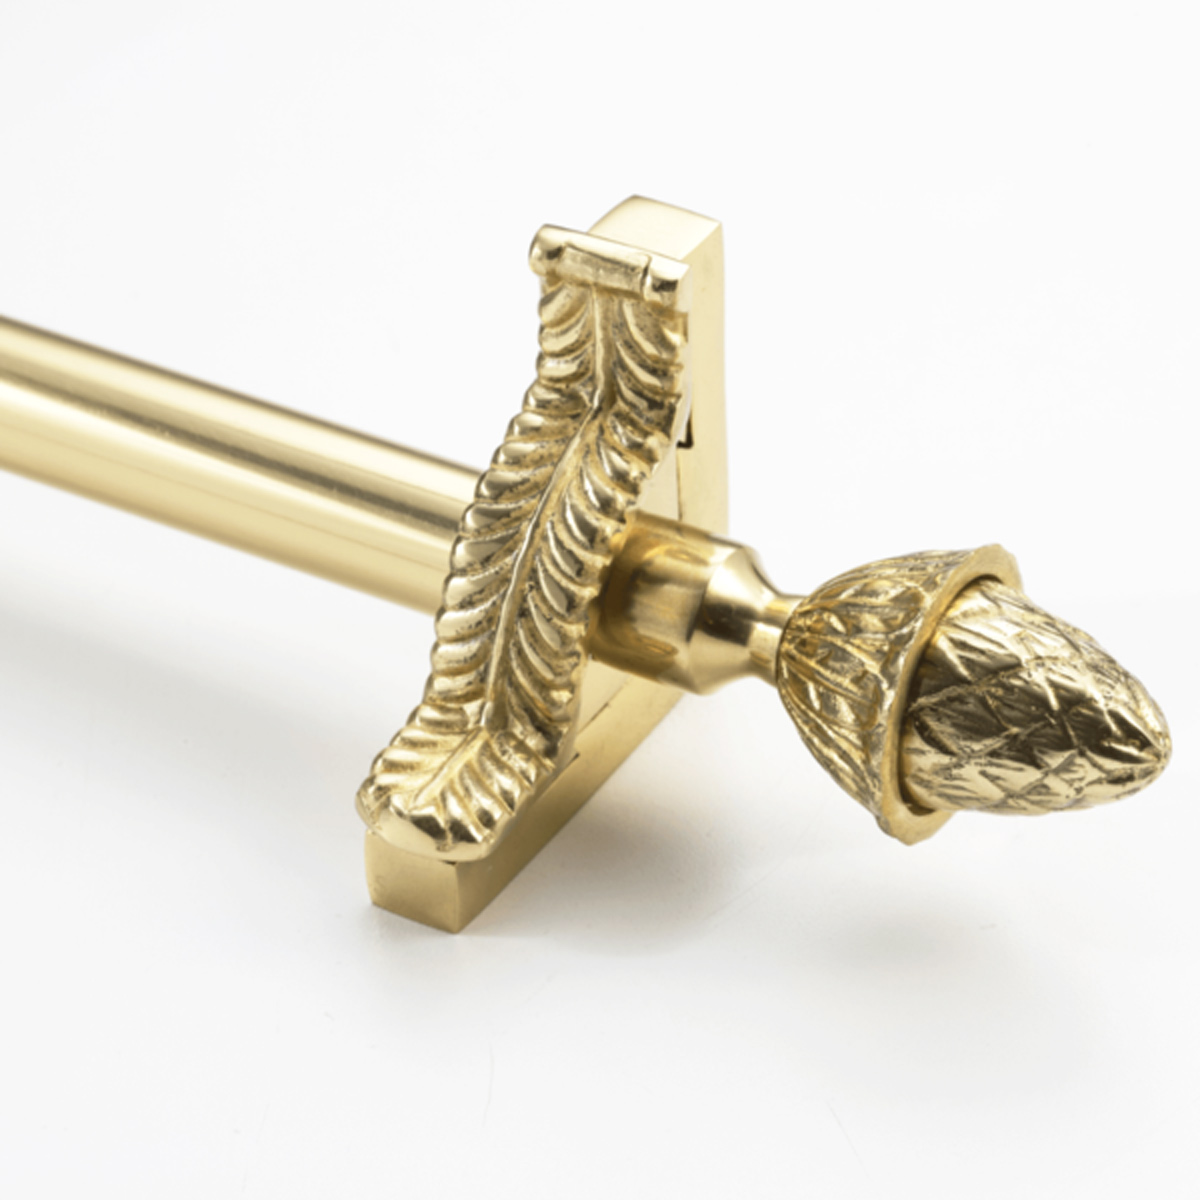 Sultan Series - Stair Rods, SS-1001 Smooth Polished Brass